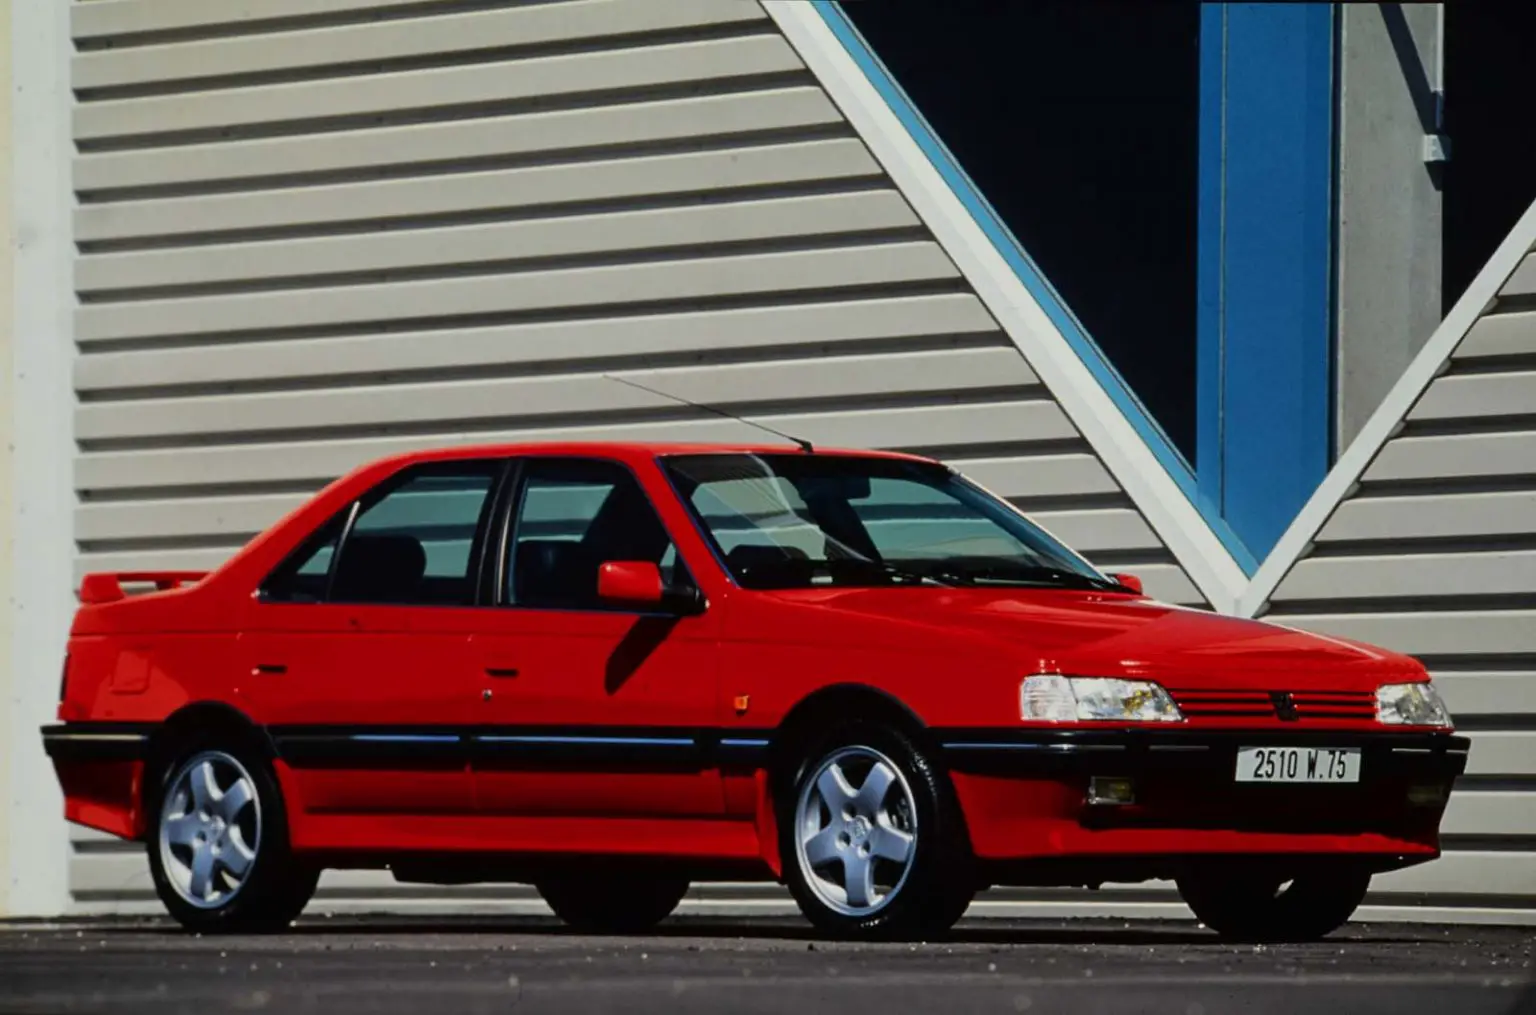 Peugeot 405 T16, Four Wheel Drive, Turbocharged, Overboost And In 1993